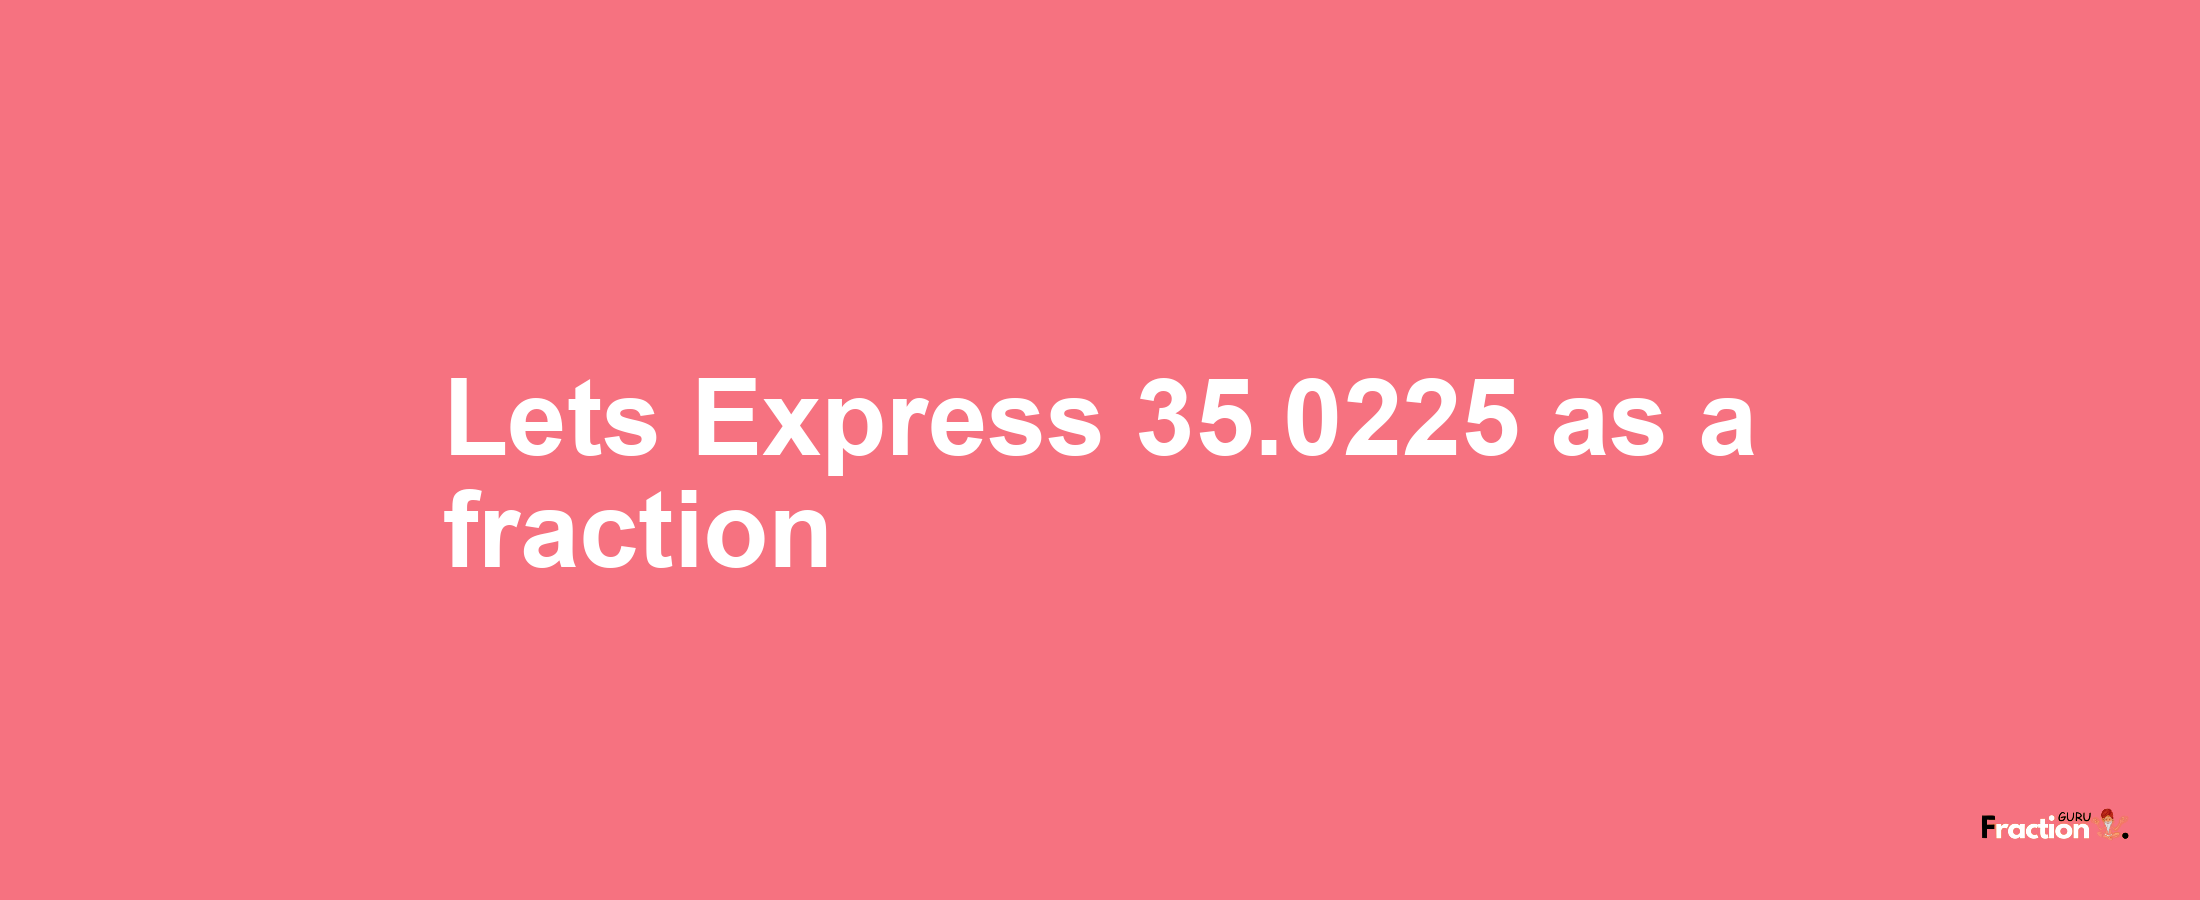 Lets Express 35.0225 as afraction